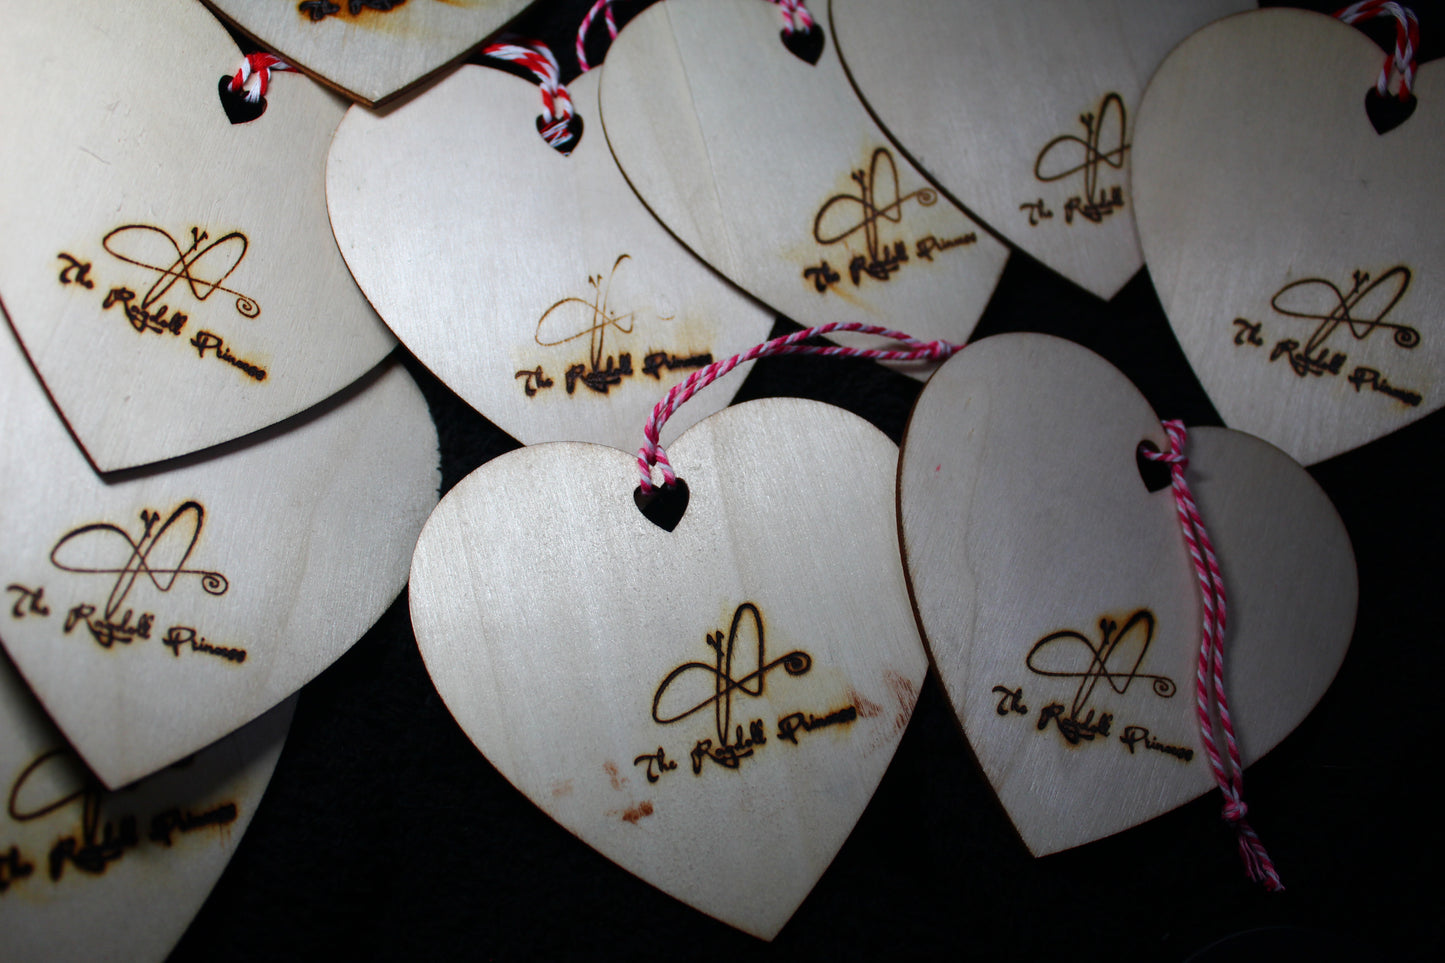 Valentines Ornaments "CLASSICAL LOVE" - 'Pyrographics by The Ragdoll Princess'